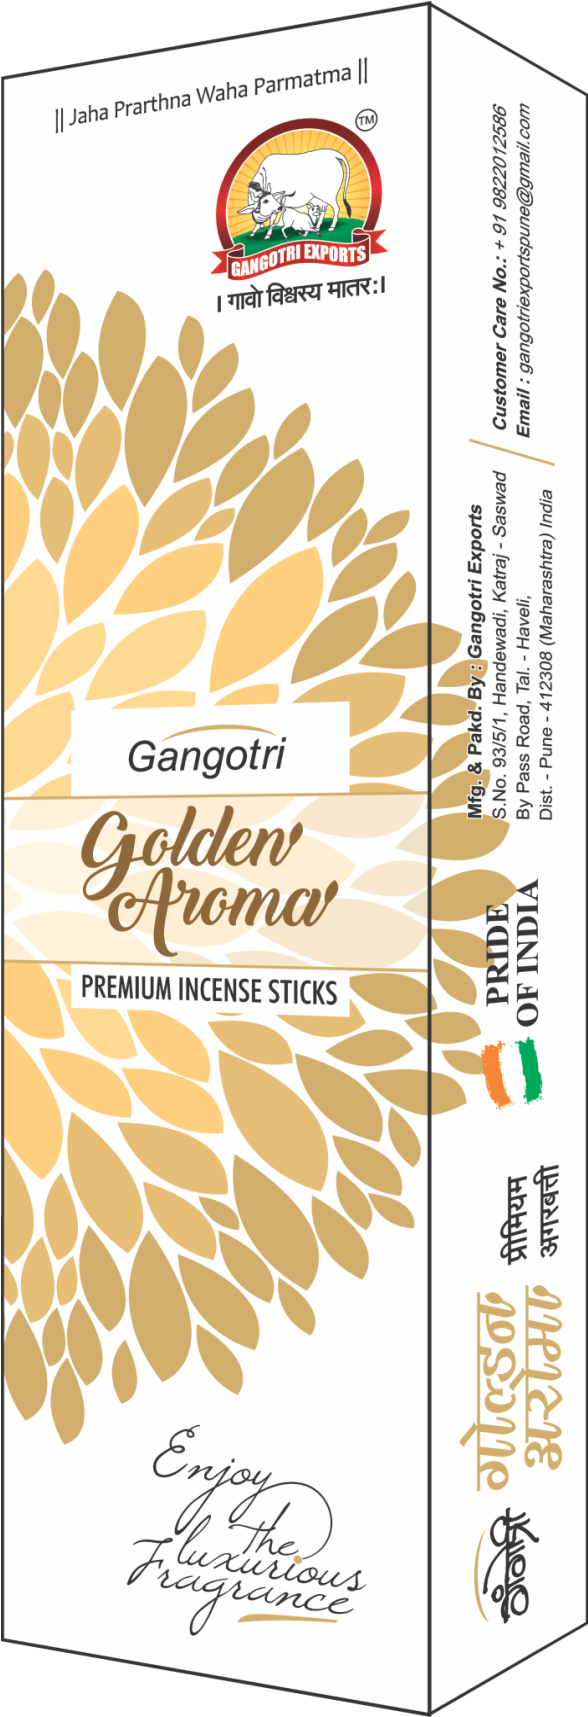 A Package Of Incense Sticks